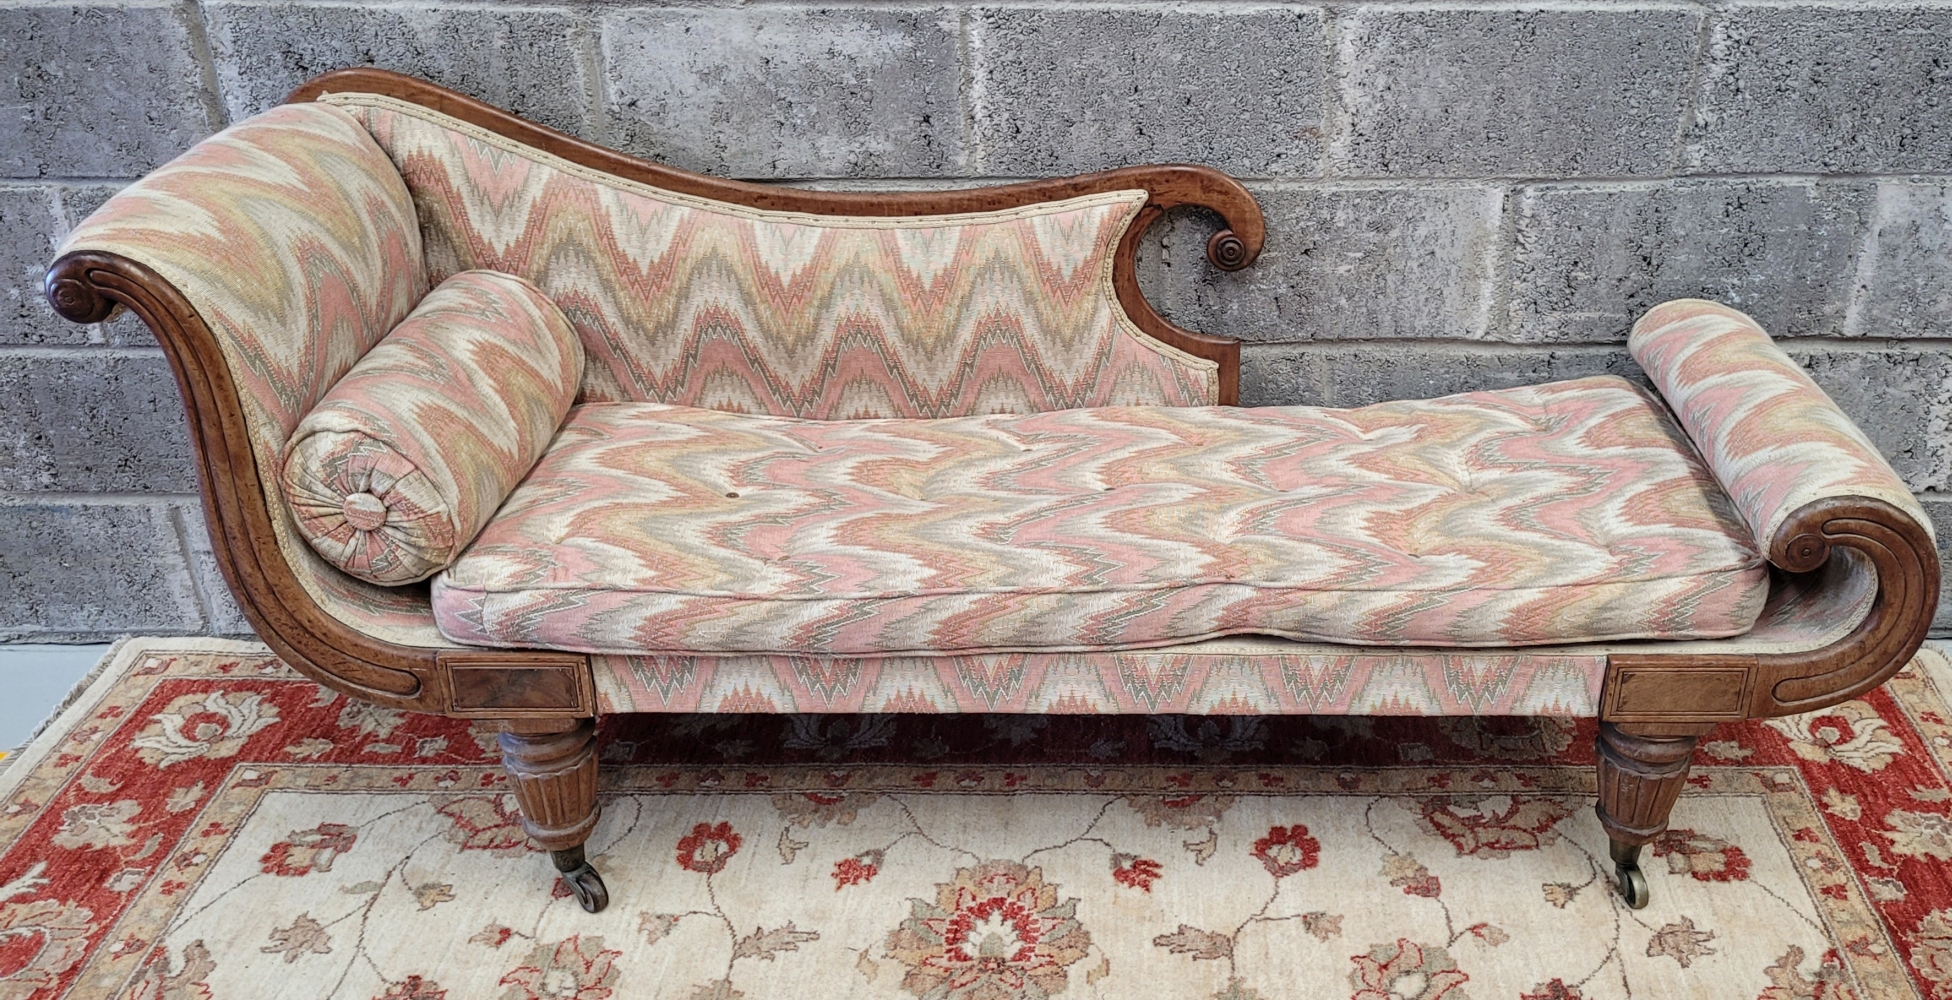 GOOD EARLY 19TH CENTURY DAY BED / CHAISE LONGUE, with scrolling rests, raised on reeded turned legs - Image 2 of 6